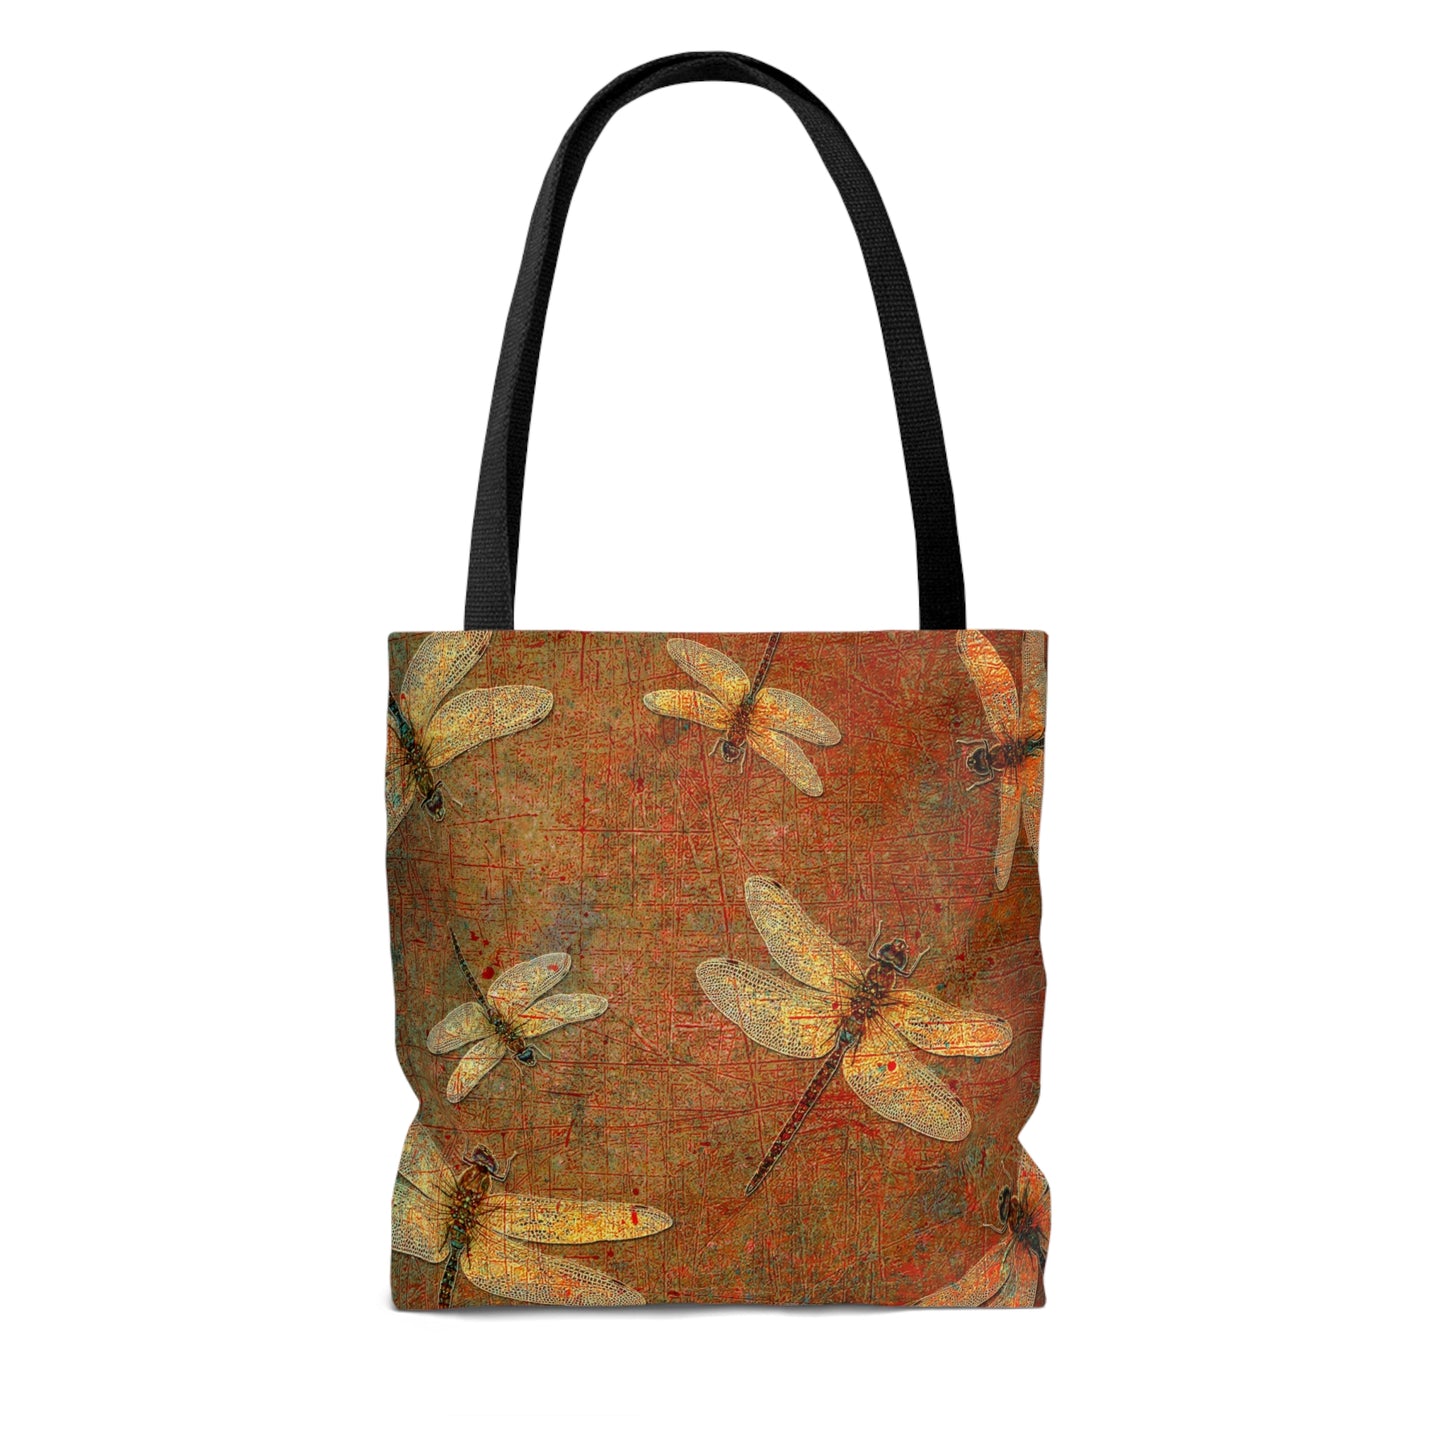 Dragonfly Themed Bags and Accessories - Flight of Golden Dragonflies on Brown Stone Printed on Tote Bag